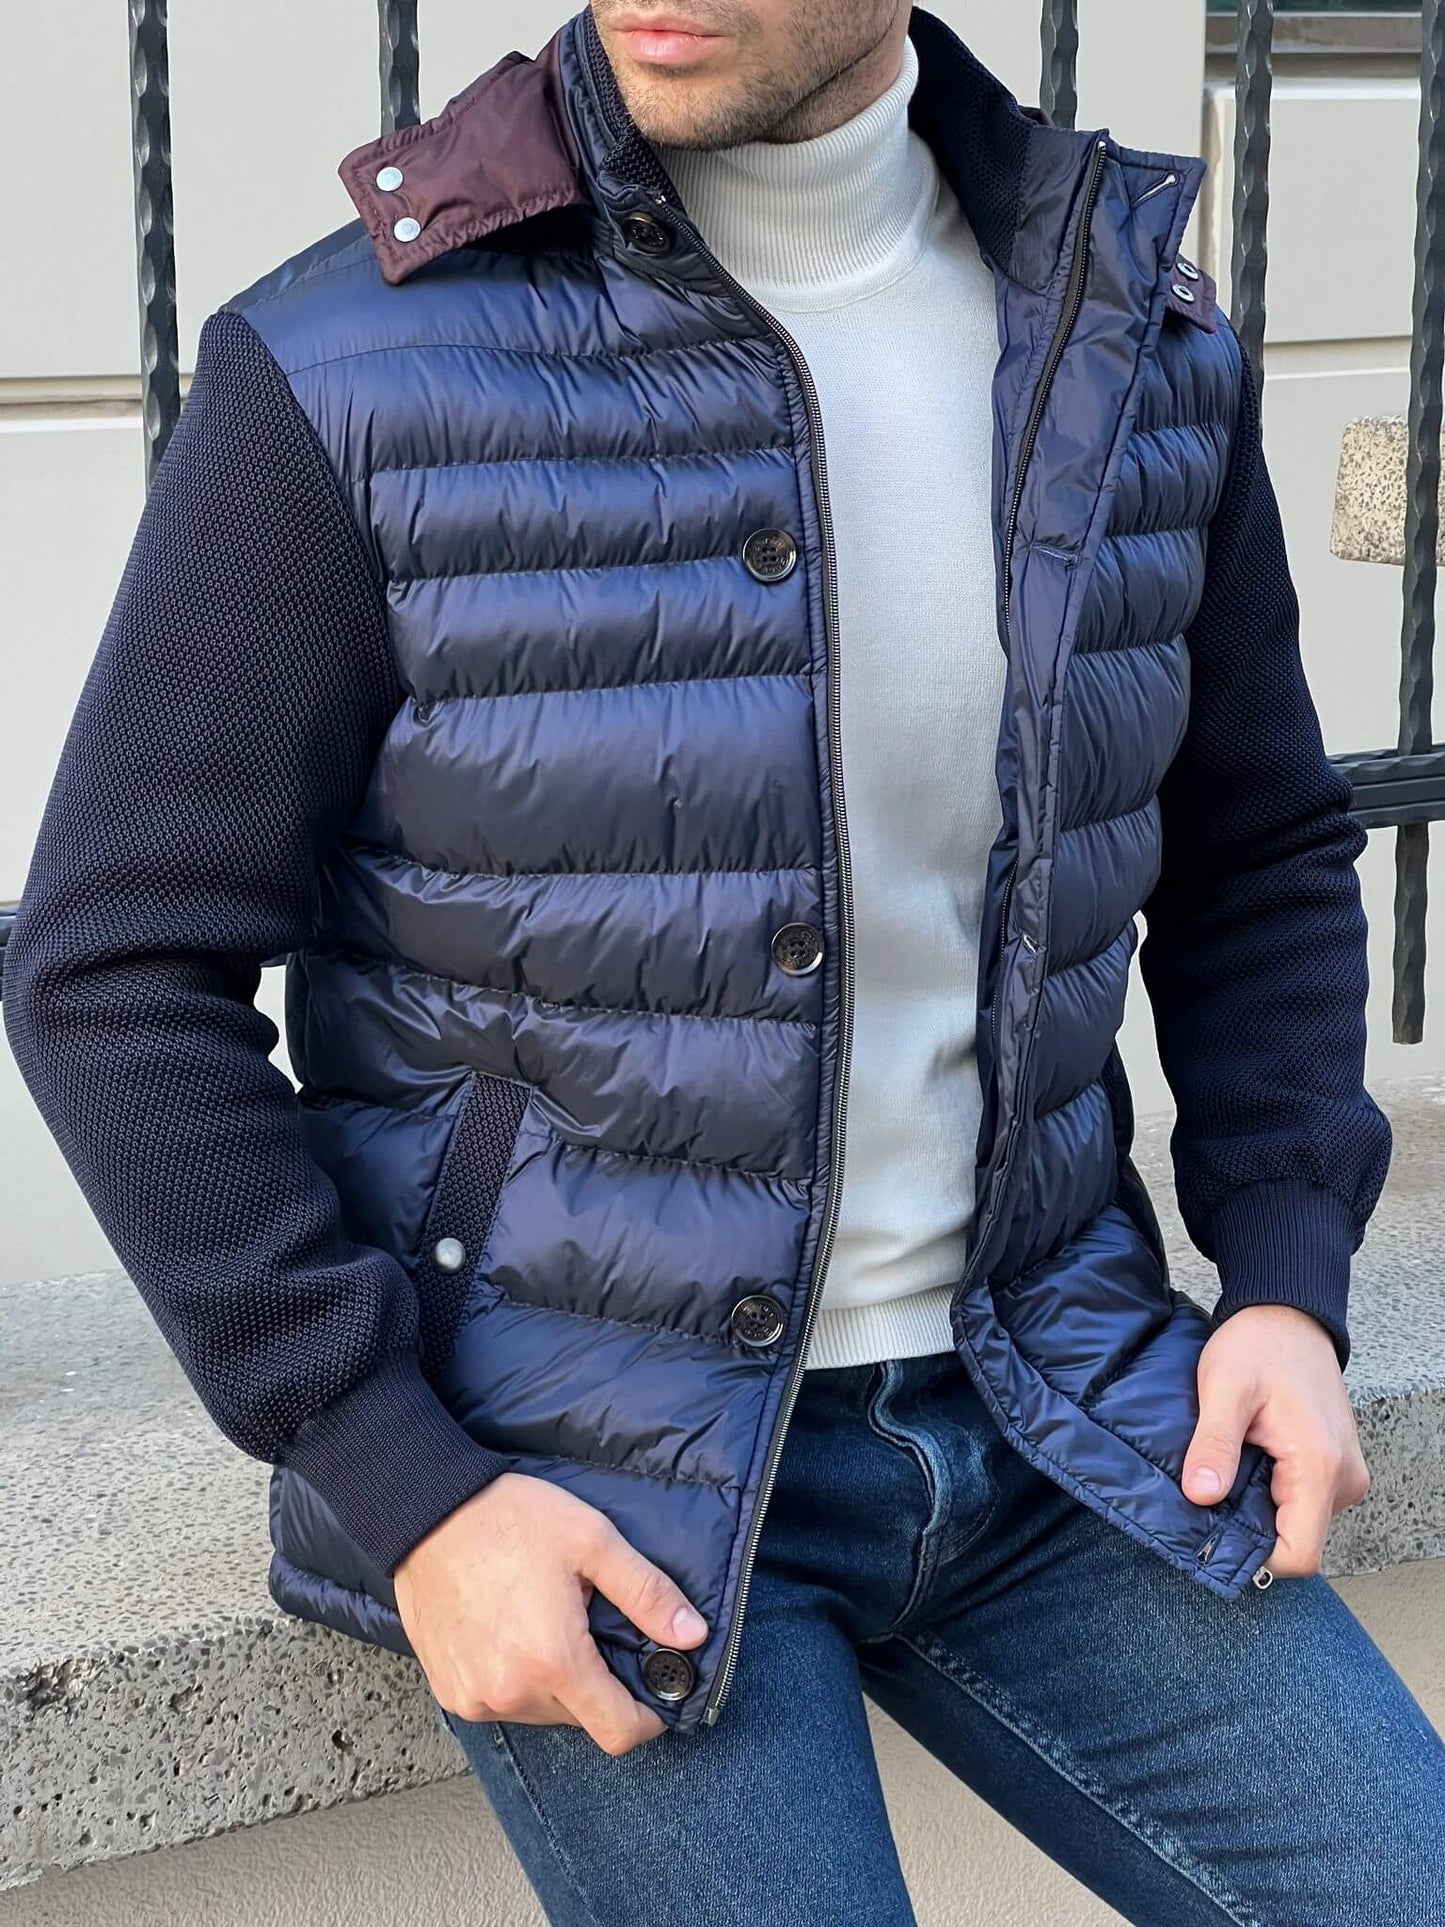 Modern and refined: Male fashion model in a textured navy blue knit coat, a timeless choice for the season.